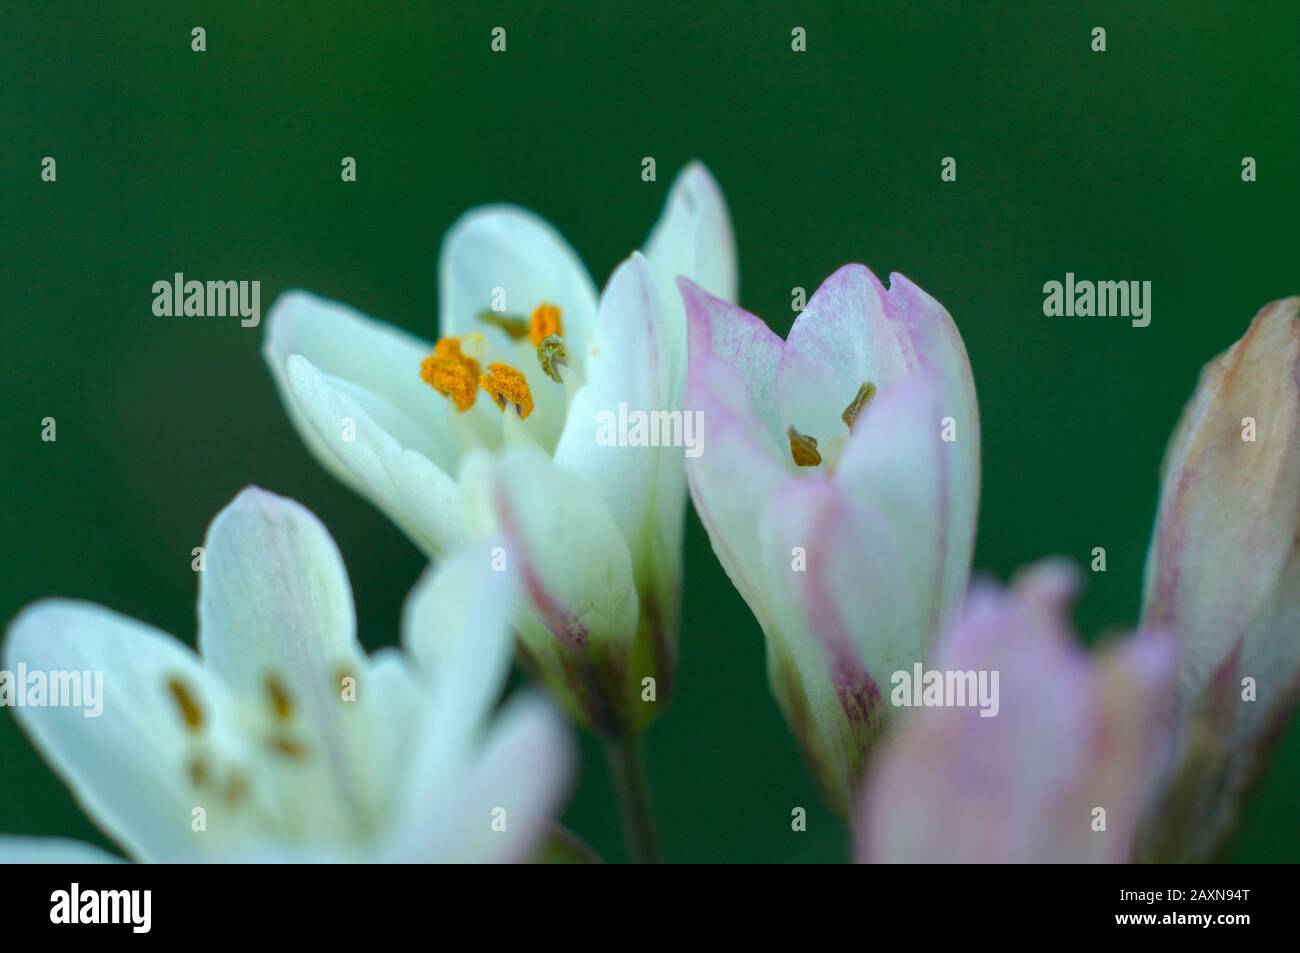 Wild garlic flowers in the orchard of Valencia, Spain. Stock Photo